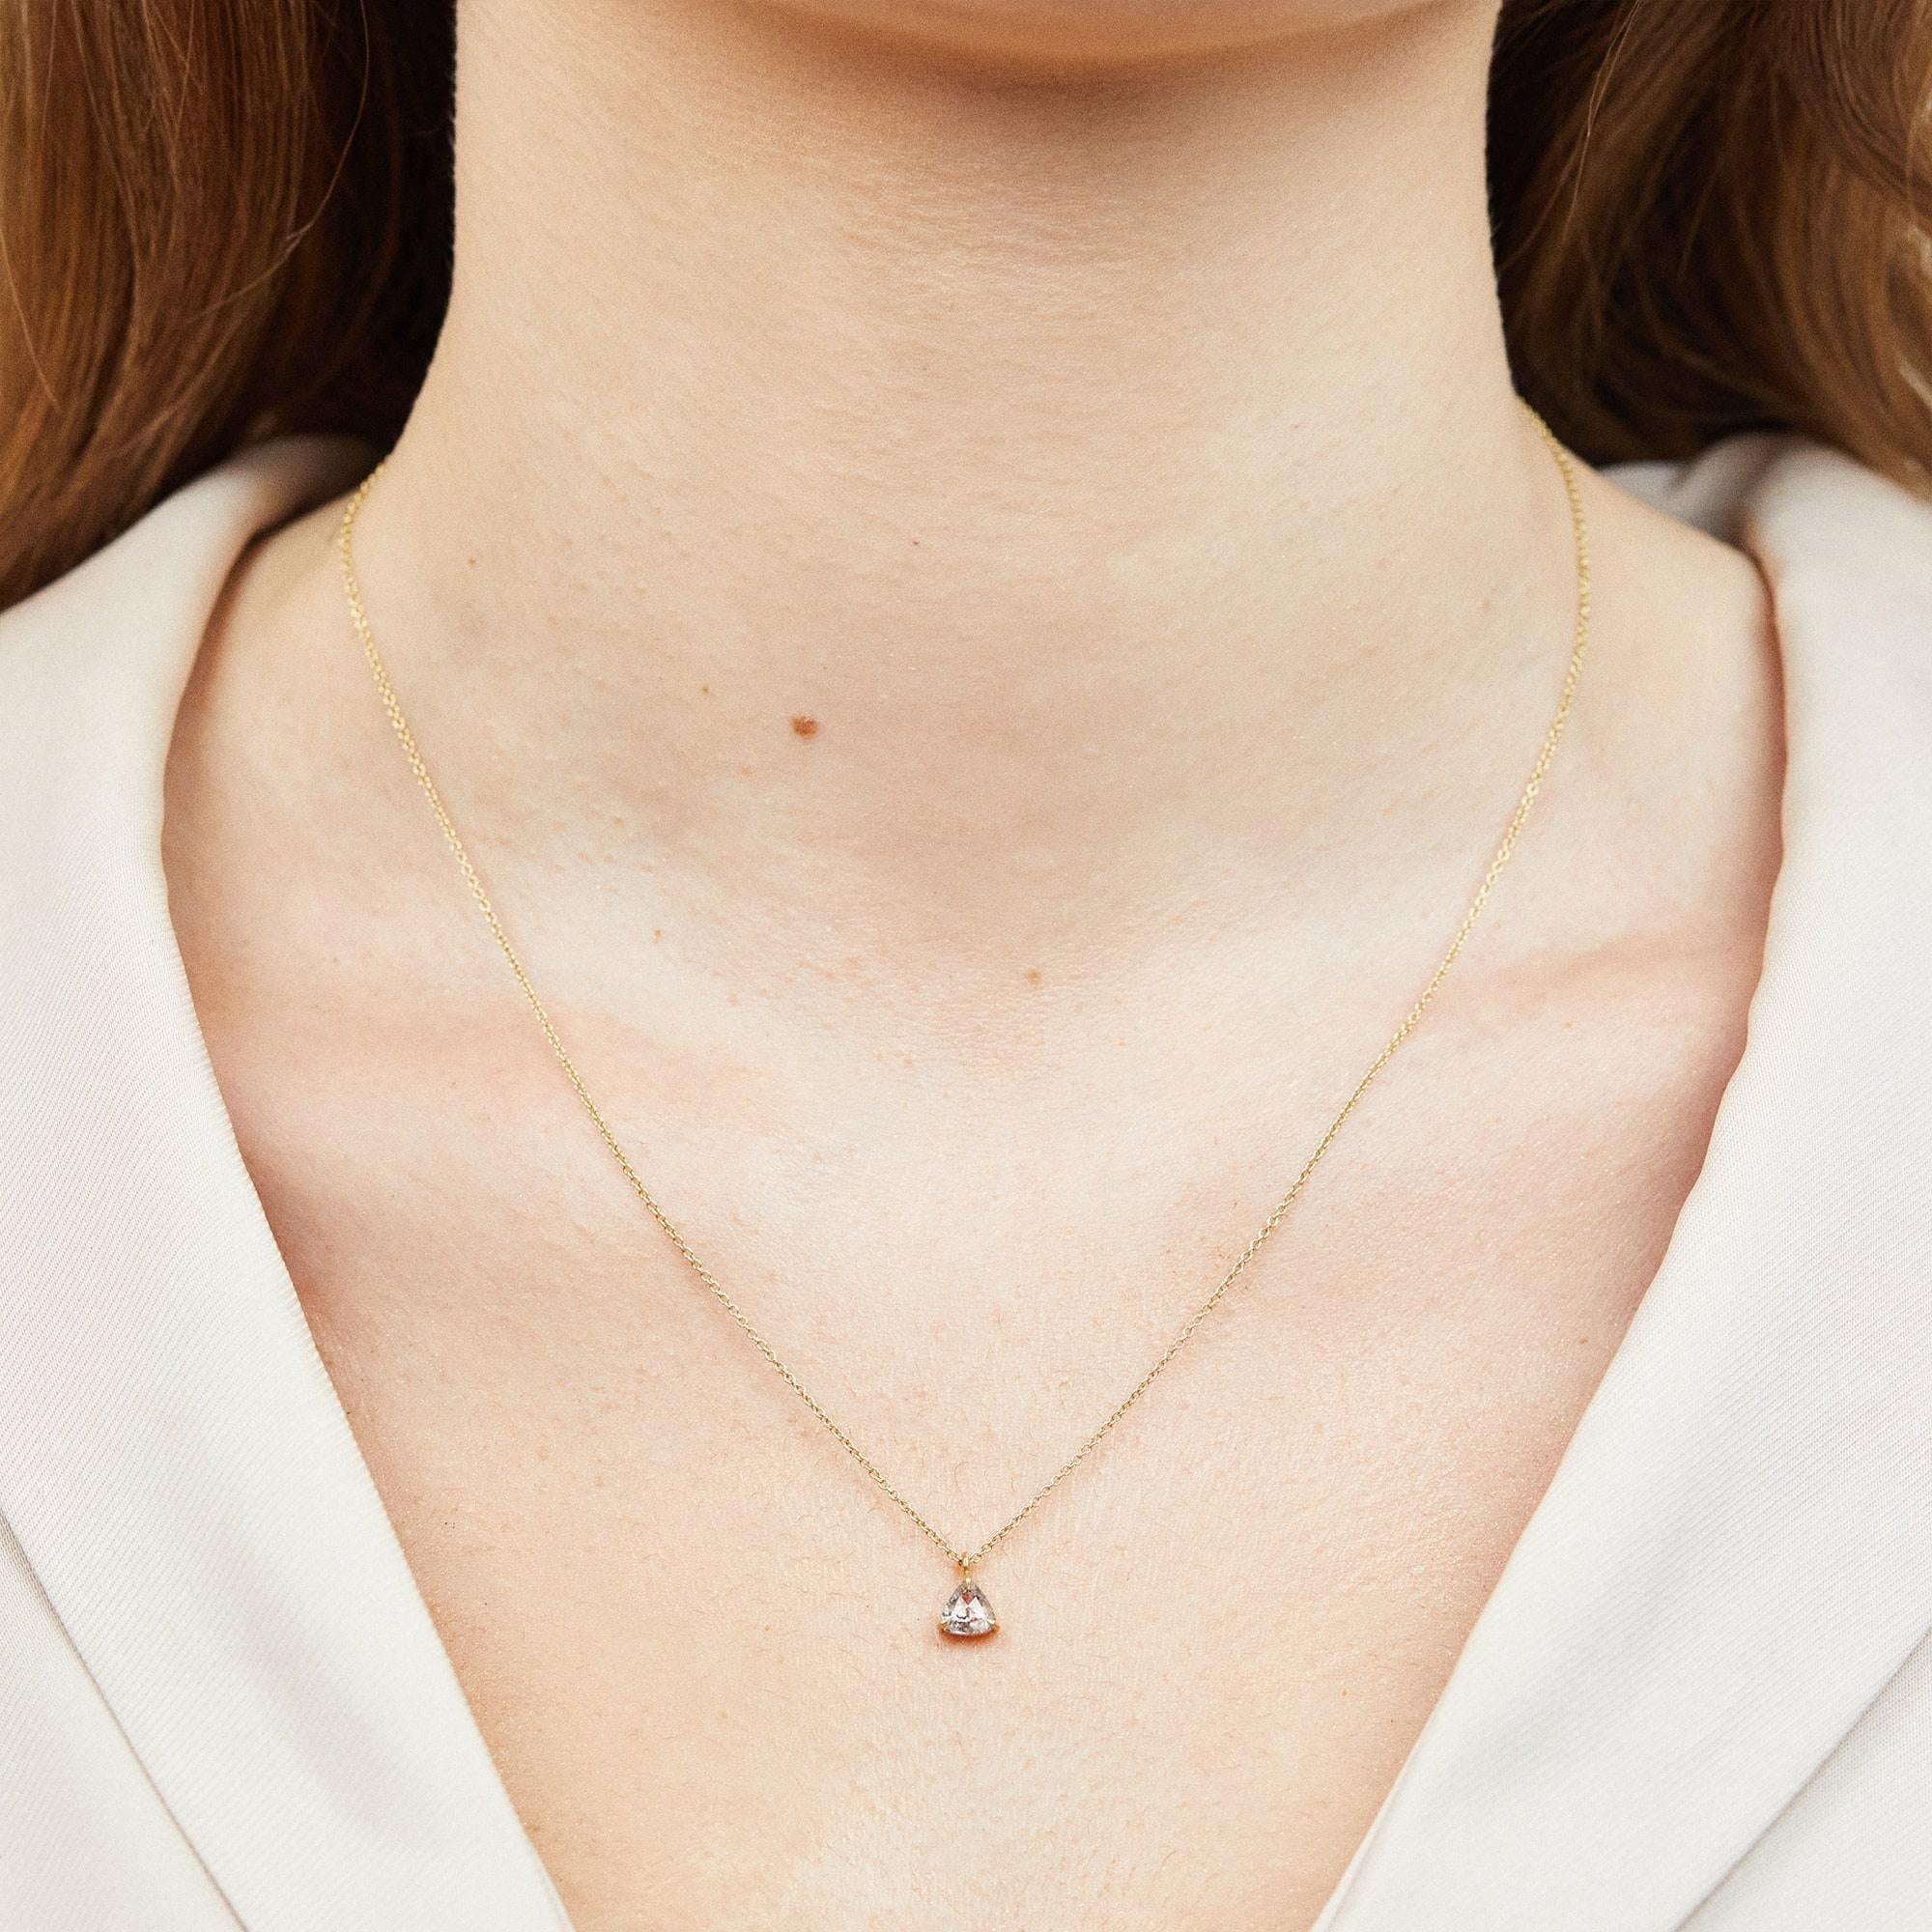 Stone
- Diamond
- Shape: Triangle, Rose-cut
- Carat weight: 0.39
- Colour: Transparent salt & pepper

Setting
- 18ct yellow gold
- Fifteen round diamonds
- 16 inch necklace chain

Shipping Information
This necklace is ready to ship and can be